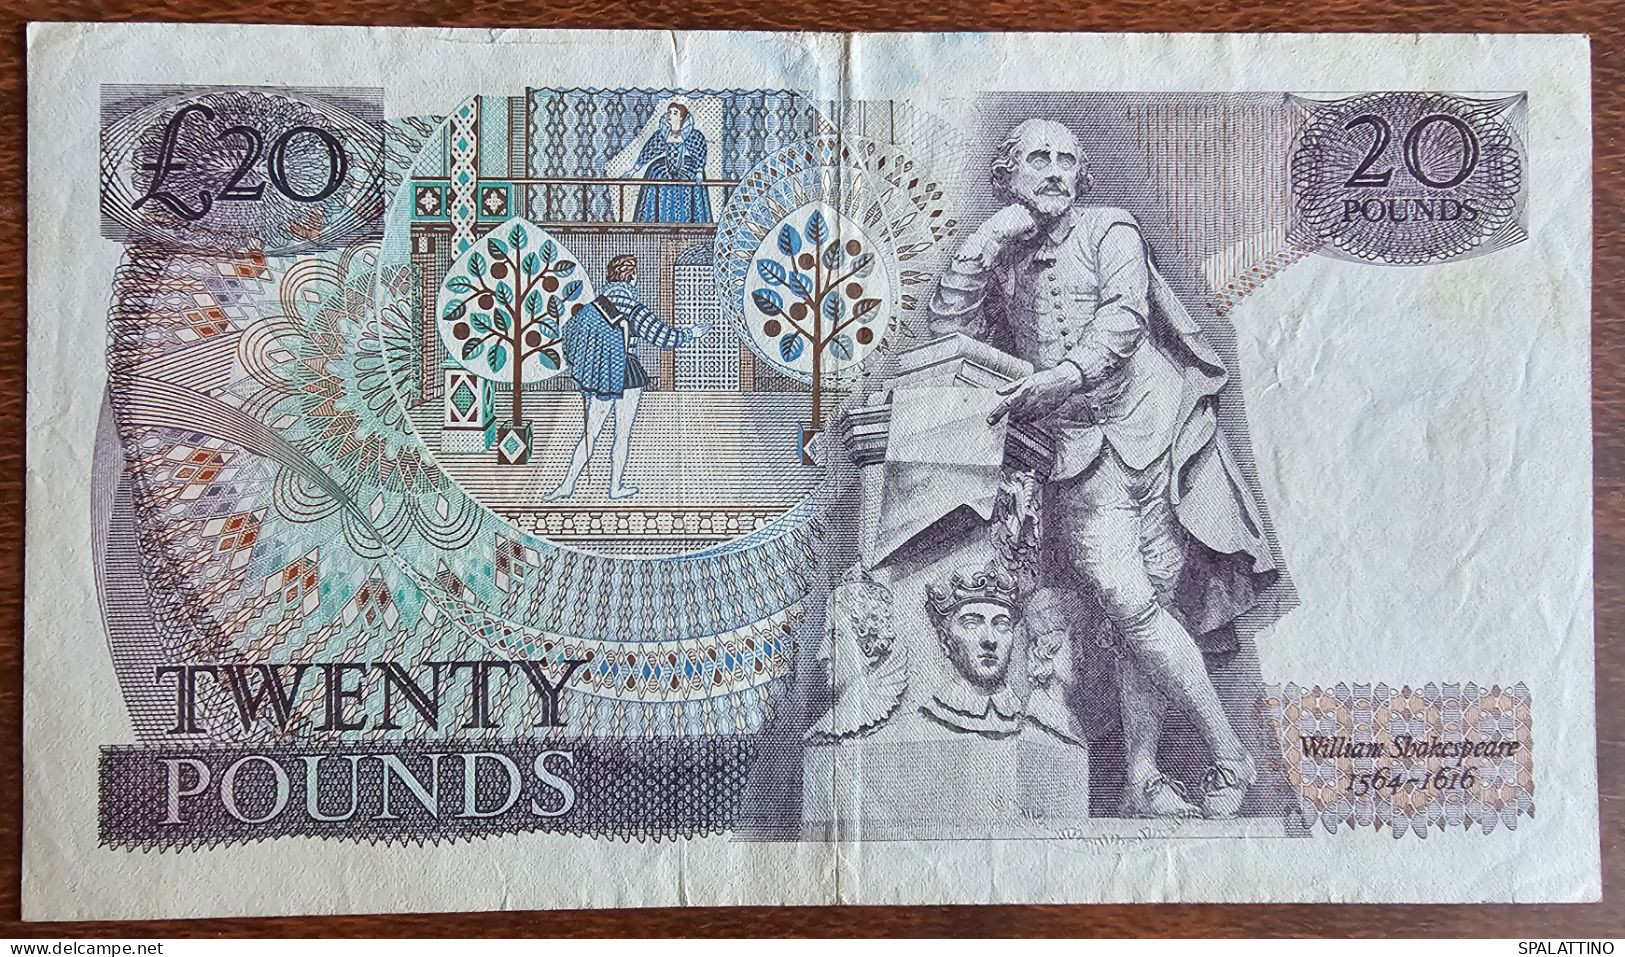 ENGLAND, GREAT BRITAIN- 20 POUNDS (1970- 1980 J.B. PAGE) SHAKESPEARE - 20 Pounds